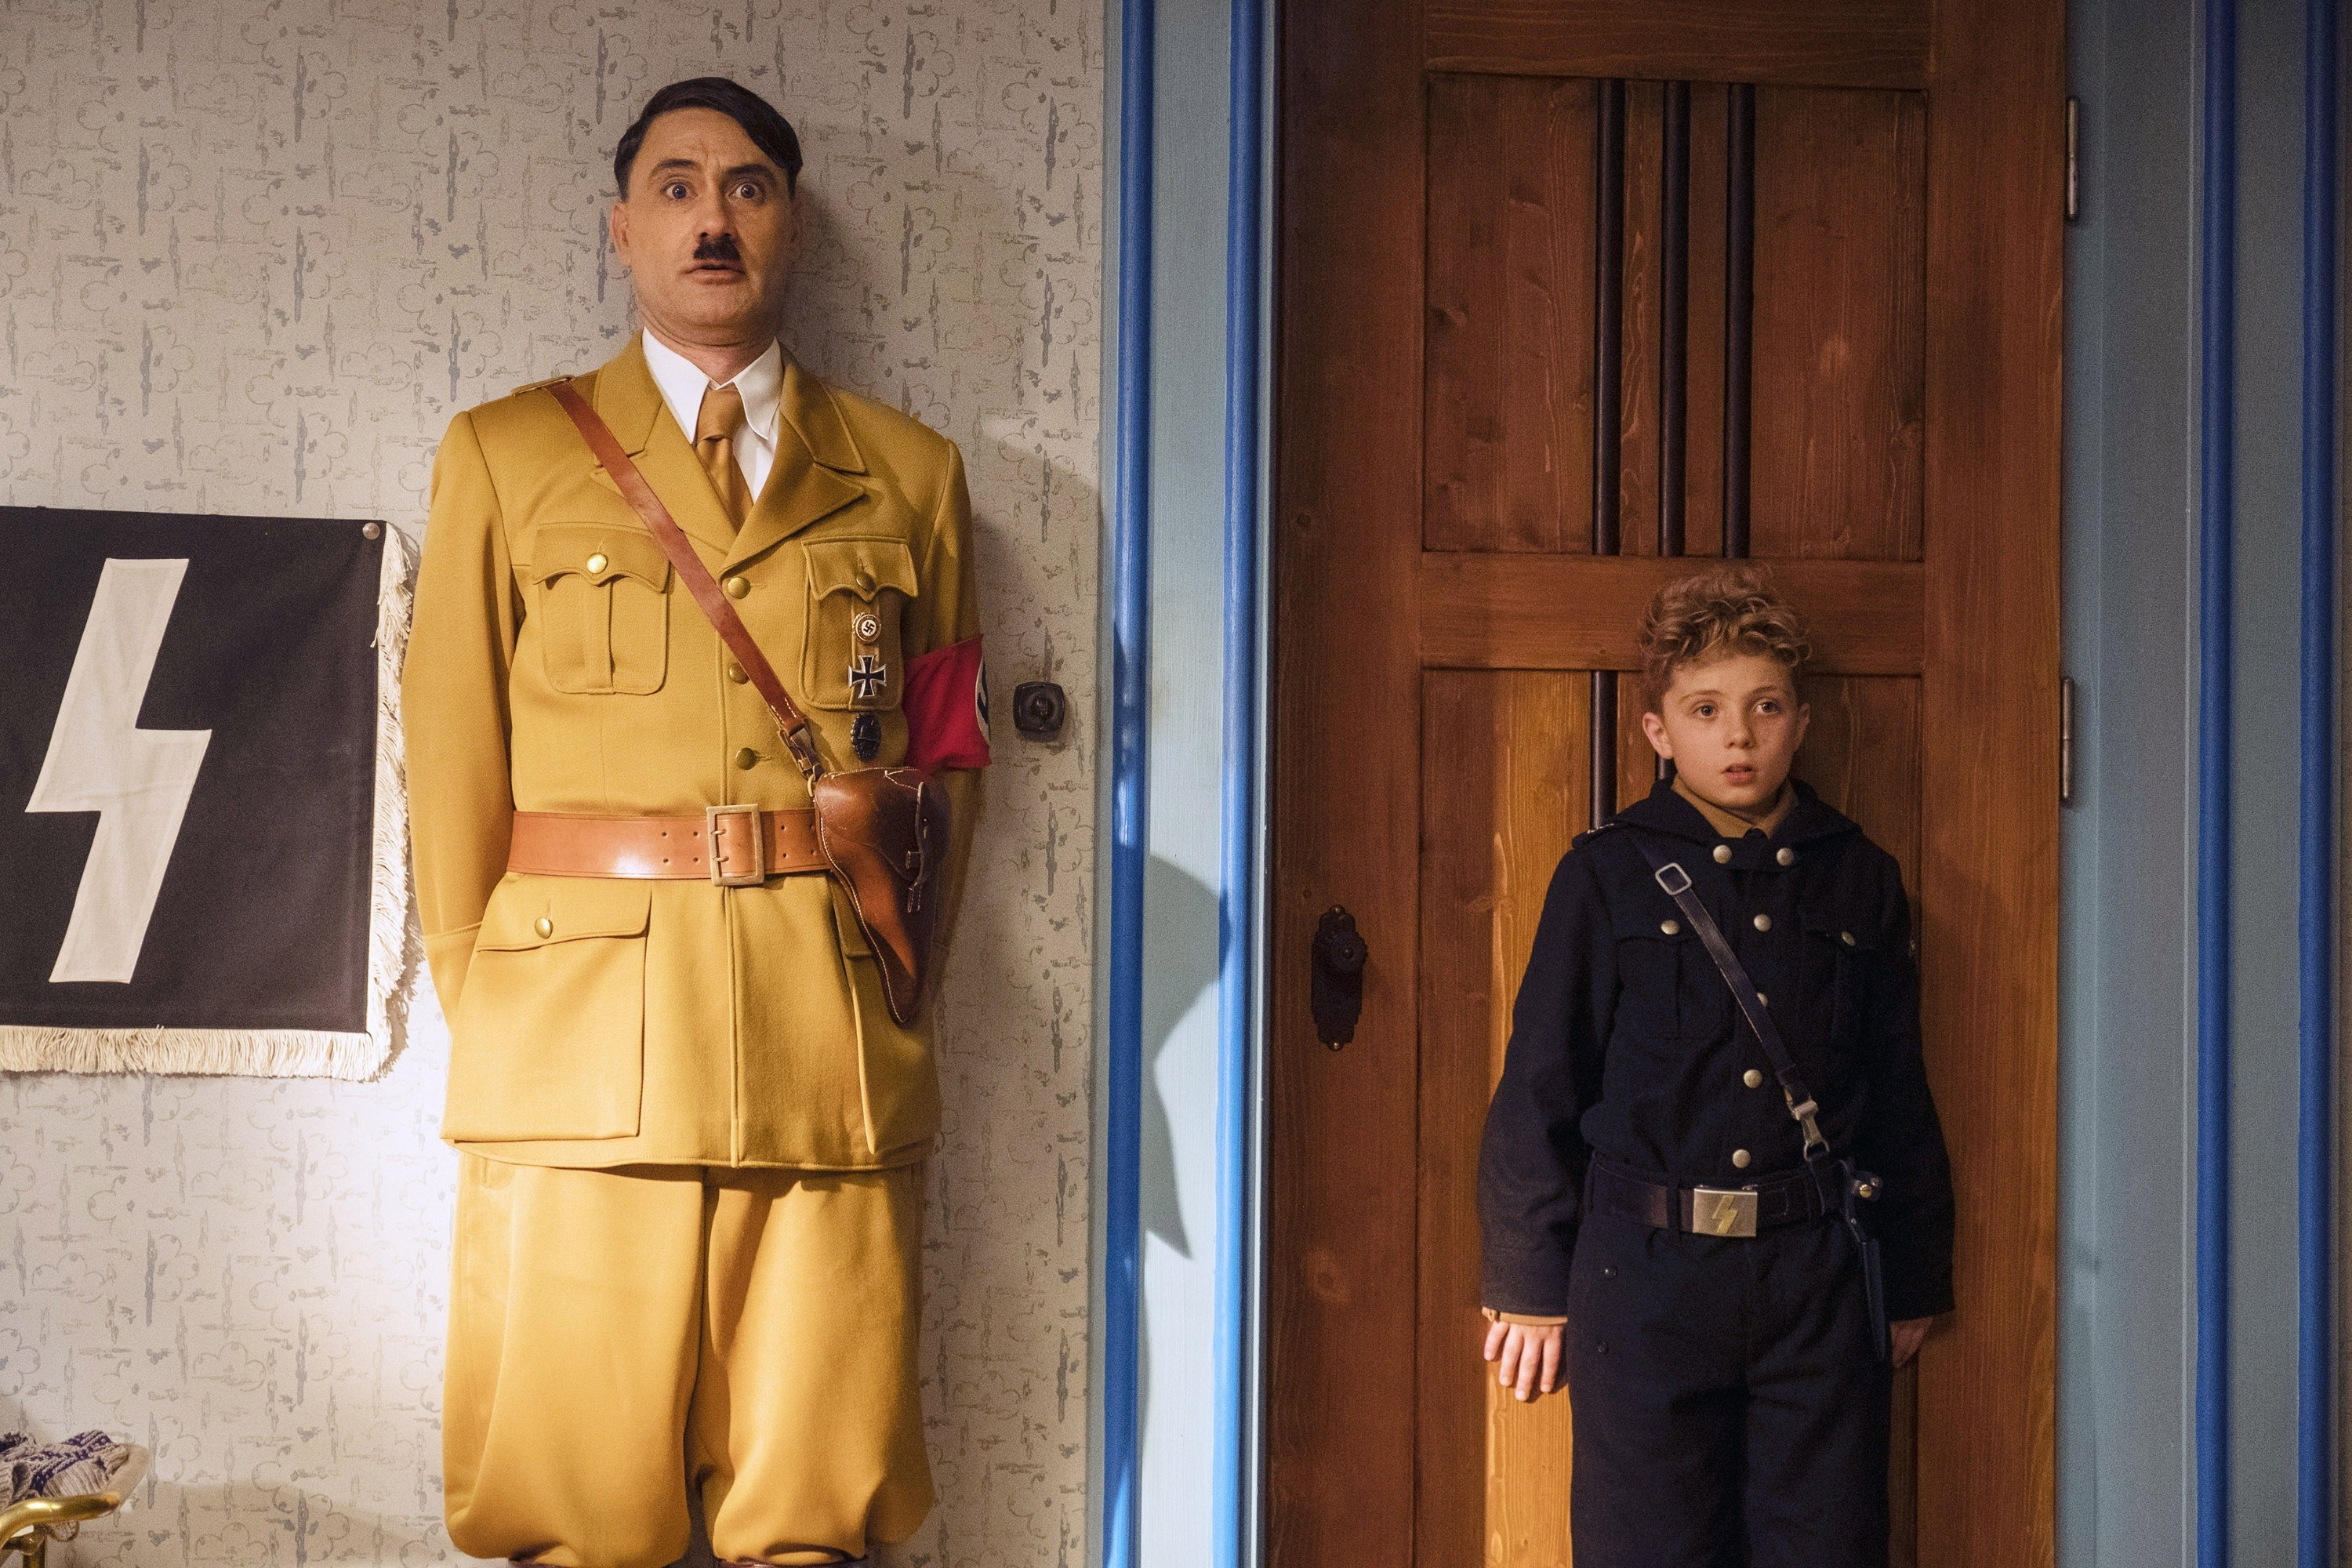 Taika Waititi and Roman Griffin Davis stand up against a wall together